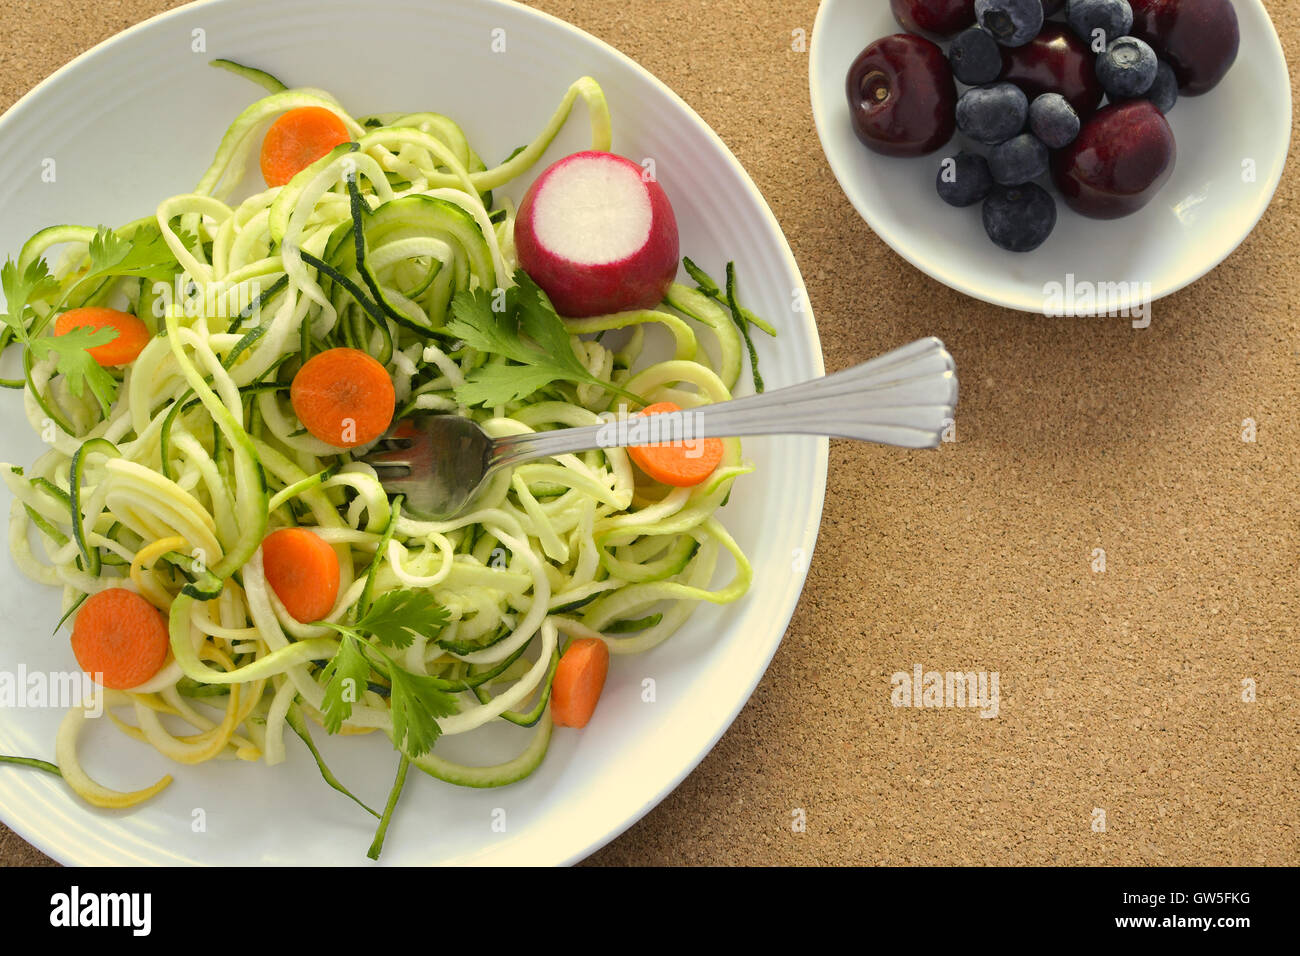 Raw Zucchini noodles with carrots and radish on white plate, over cork background, served with a bowl of blueberries and cherry Stock Photo